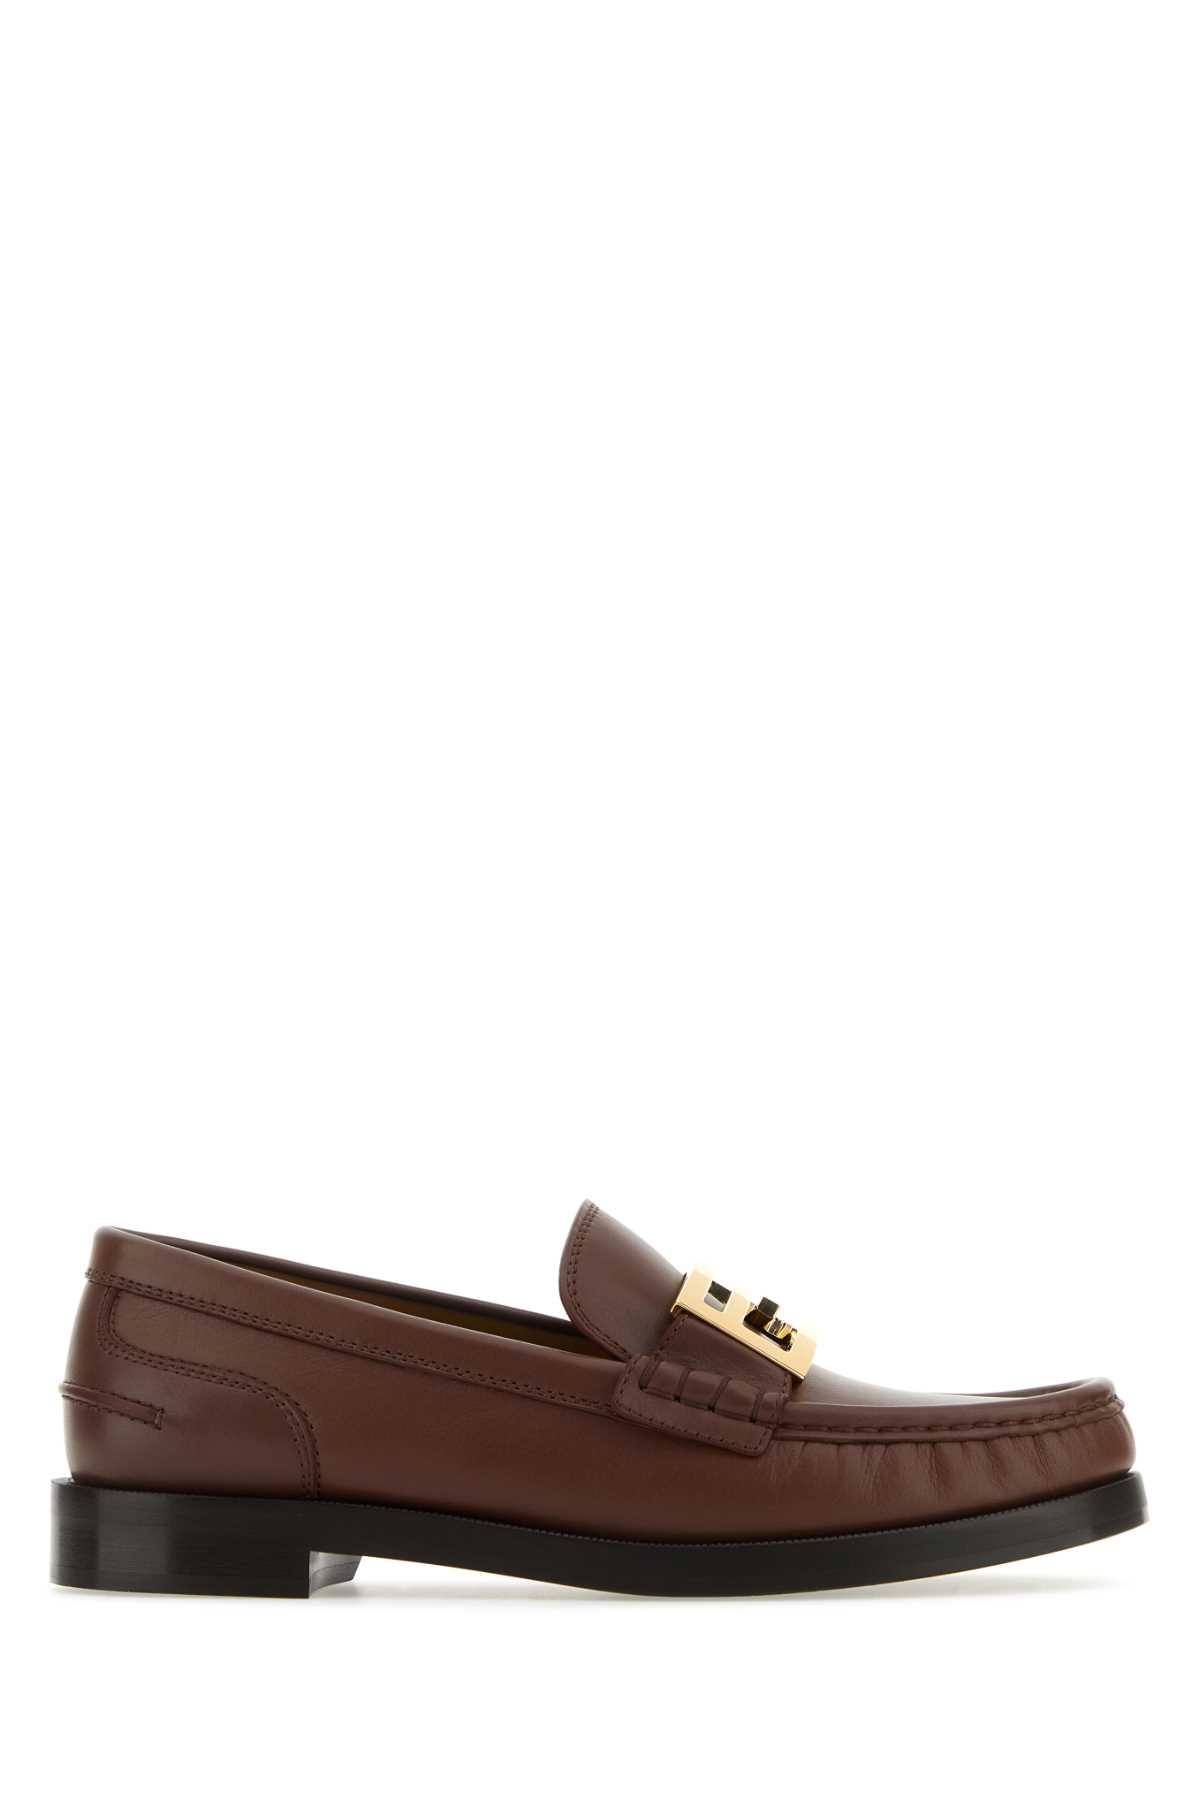 Fendi Brown Leather Baguette Loafers In Acorn